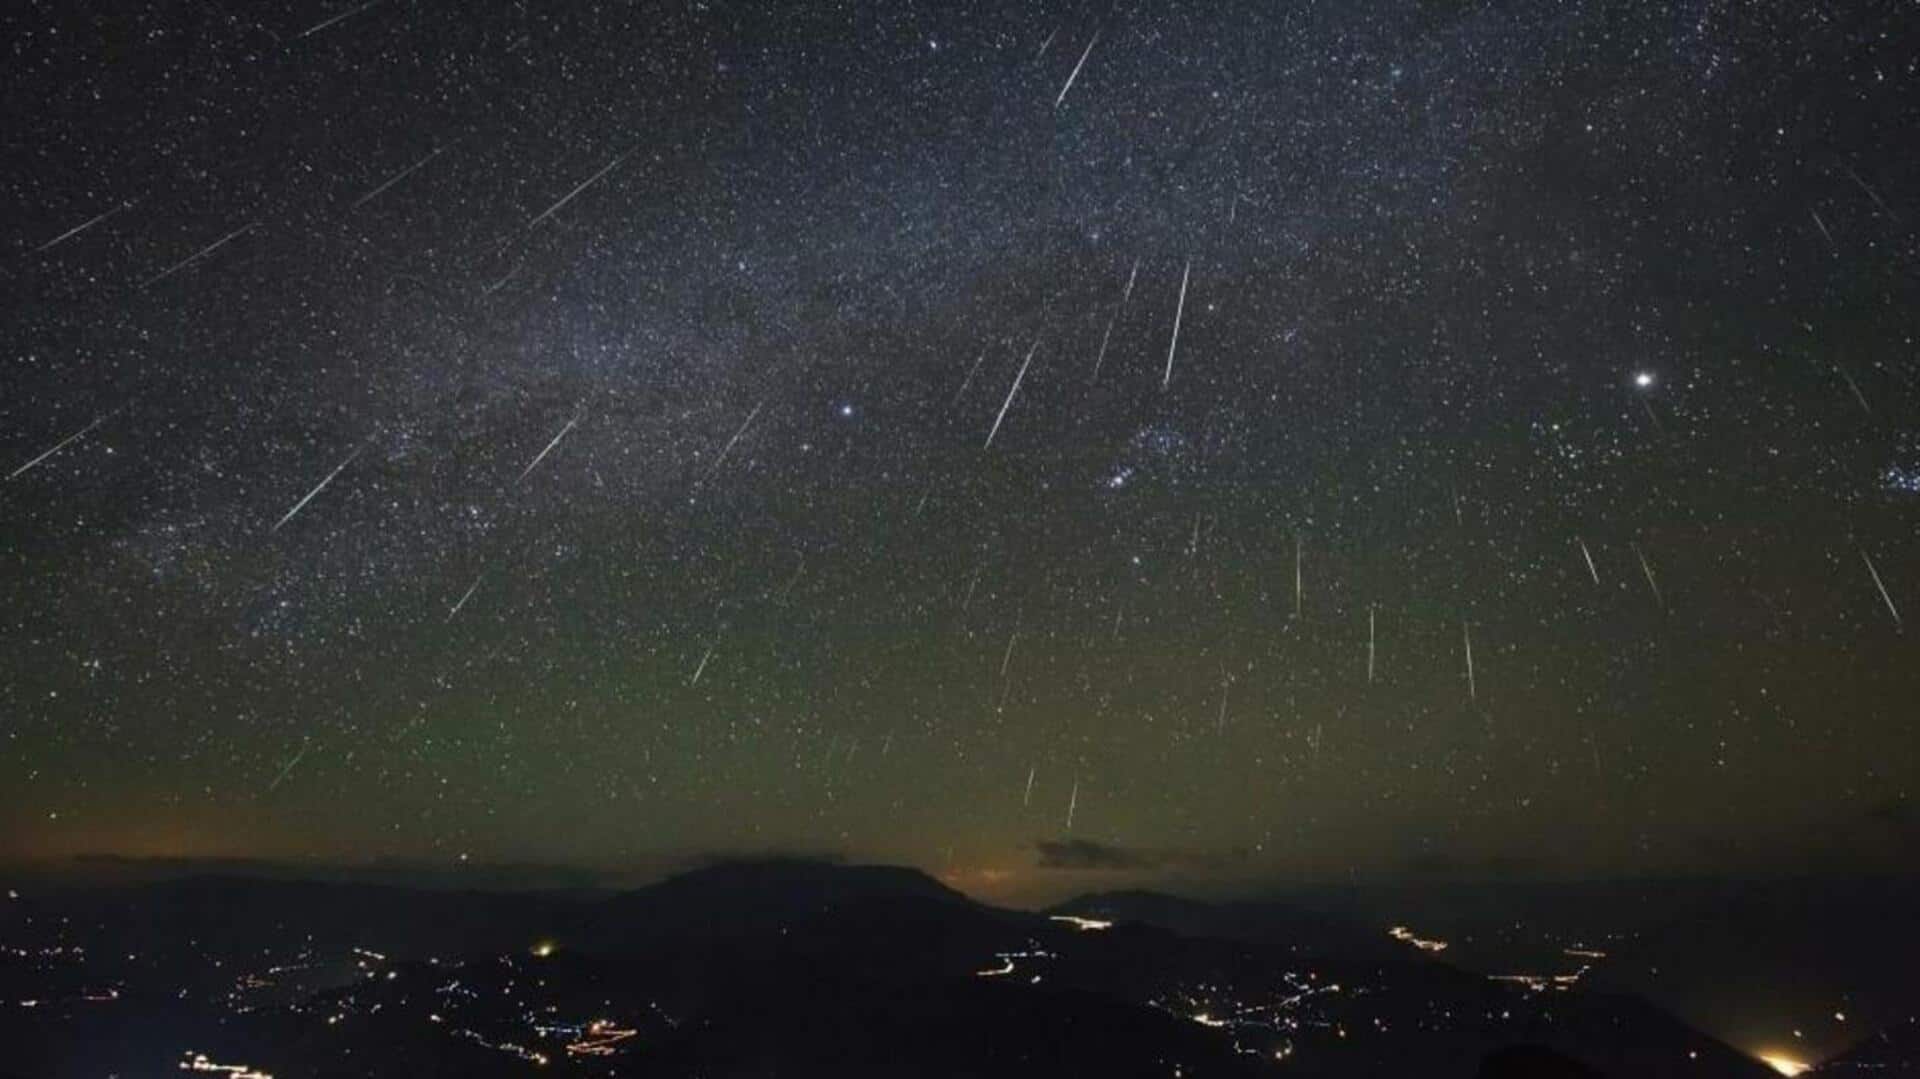 Geminid meteor shower peaks this month: How to watch